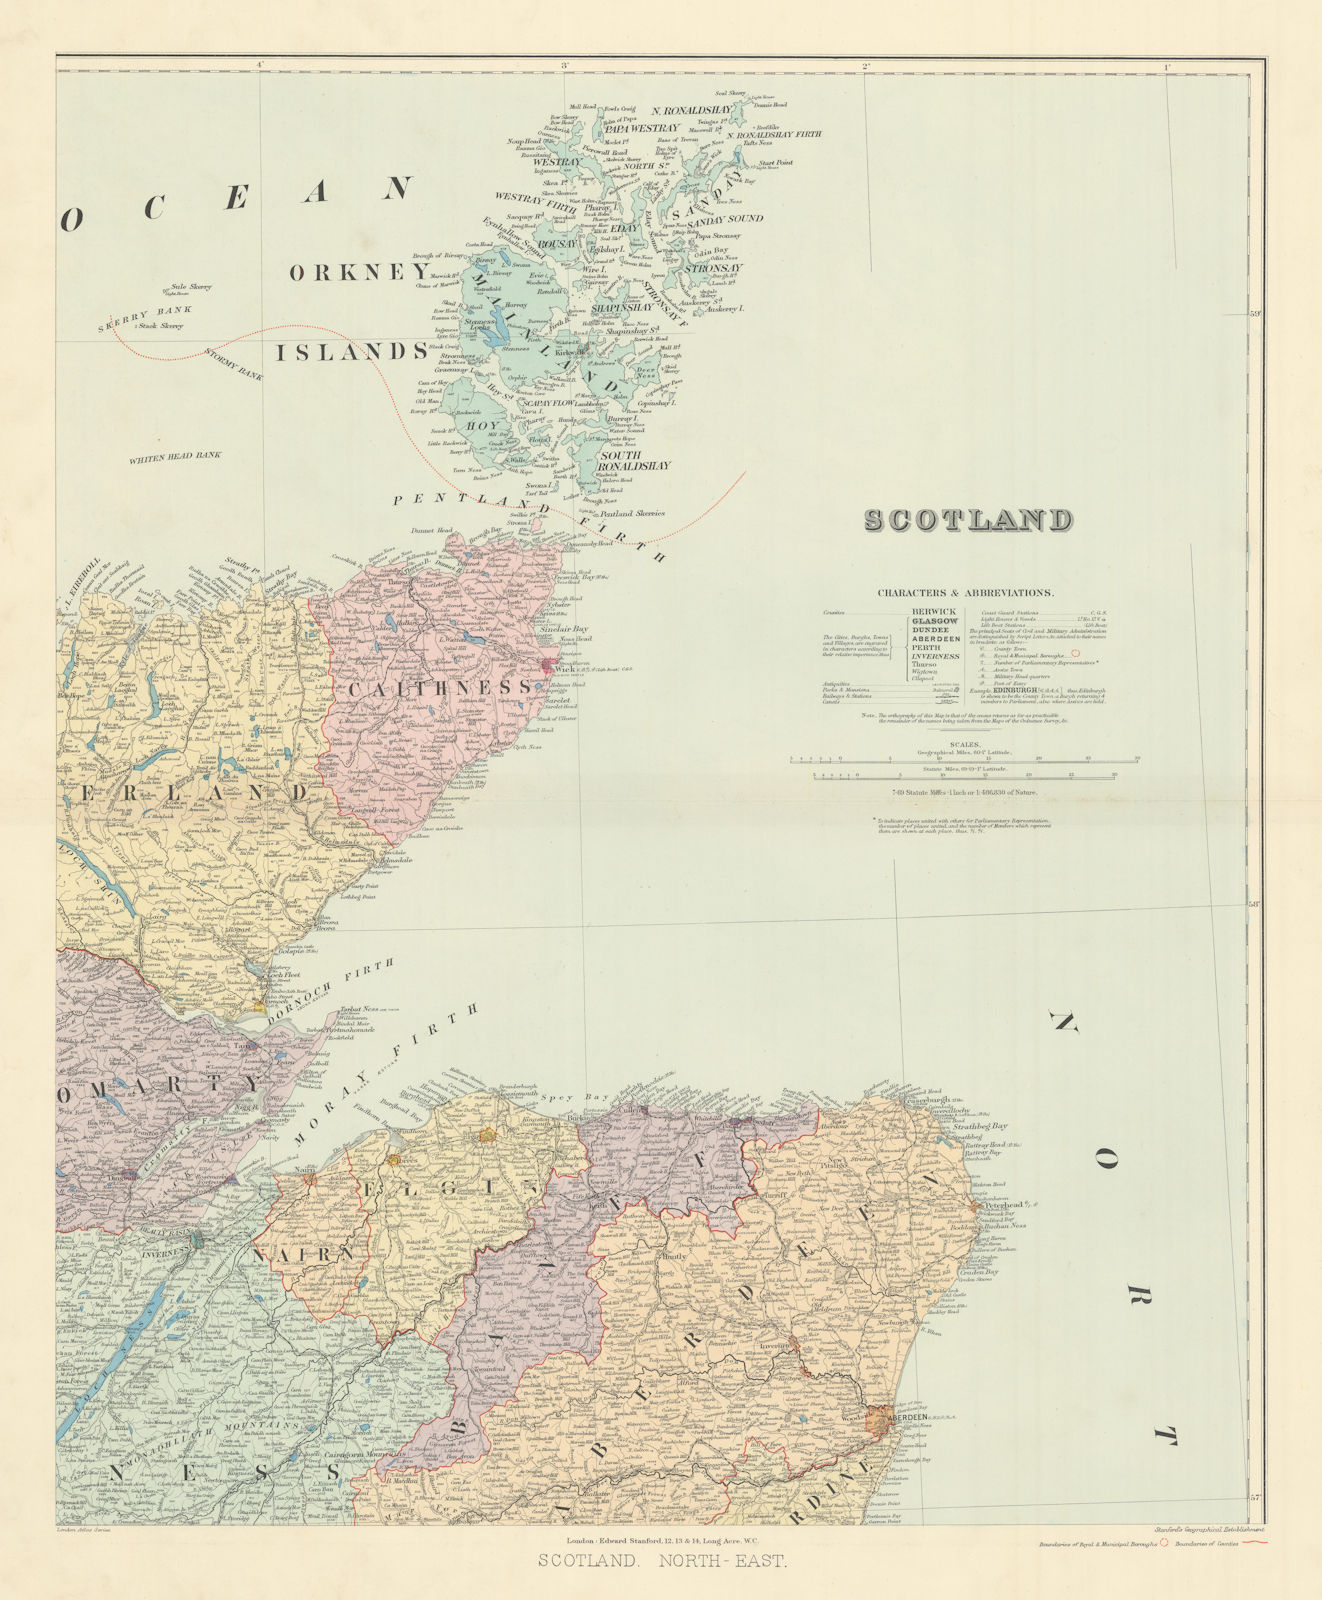 Scotland N.E. Orkney Cathiness Banff Elgin Aberdeen Sutherland STANFORD 1904 map